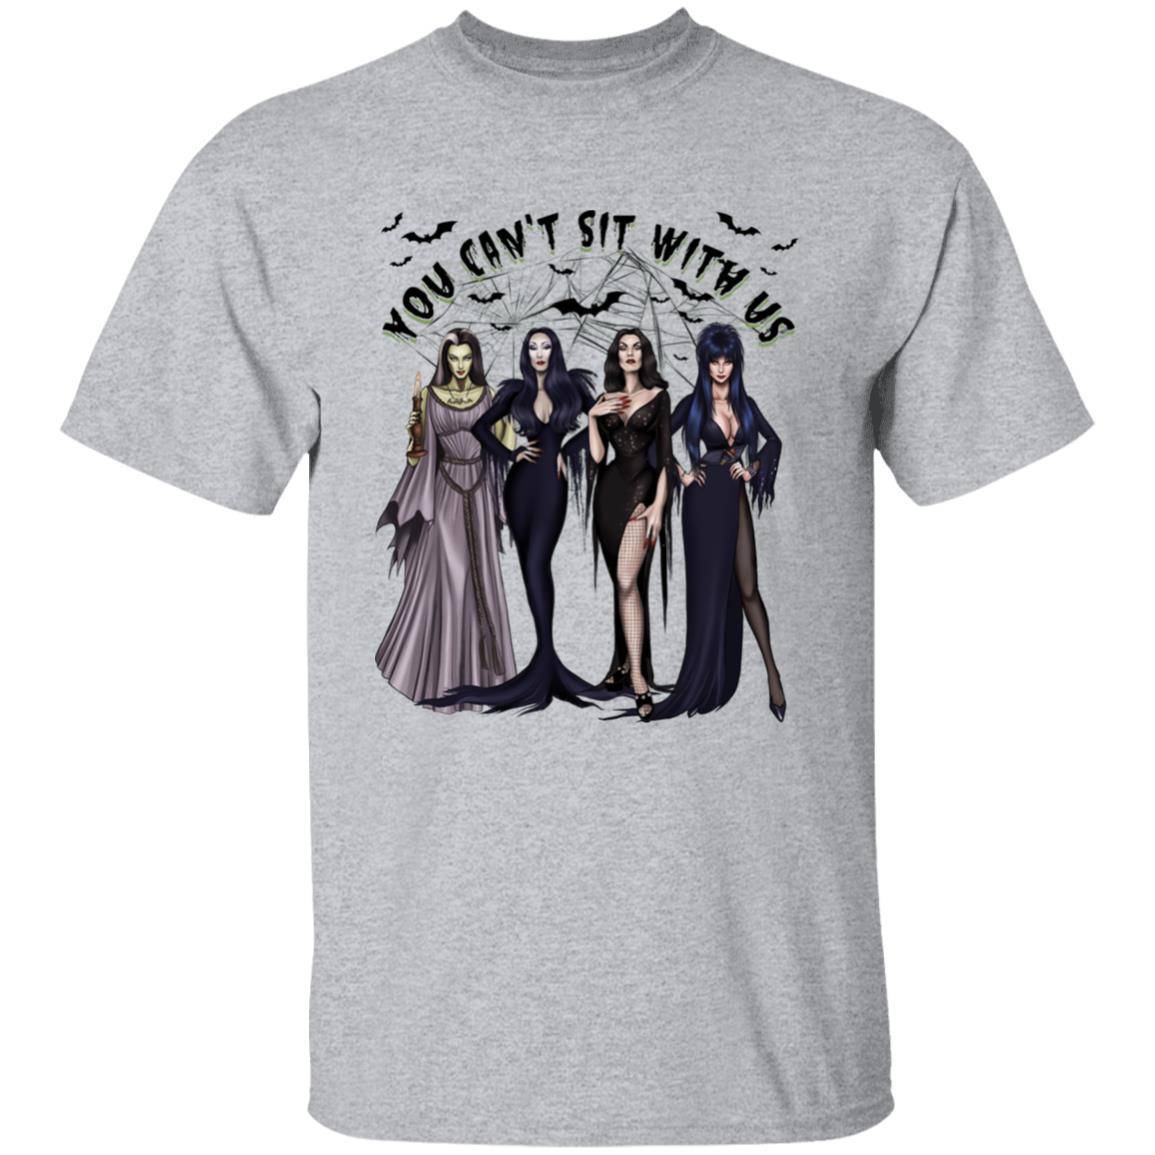 Can't Sit with Us Female Vilians Halloween T-Shirt / anygiftforyou